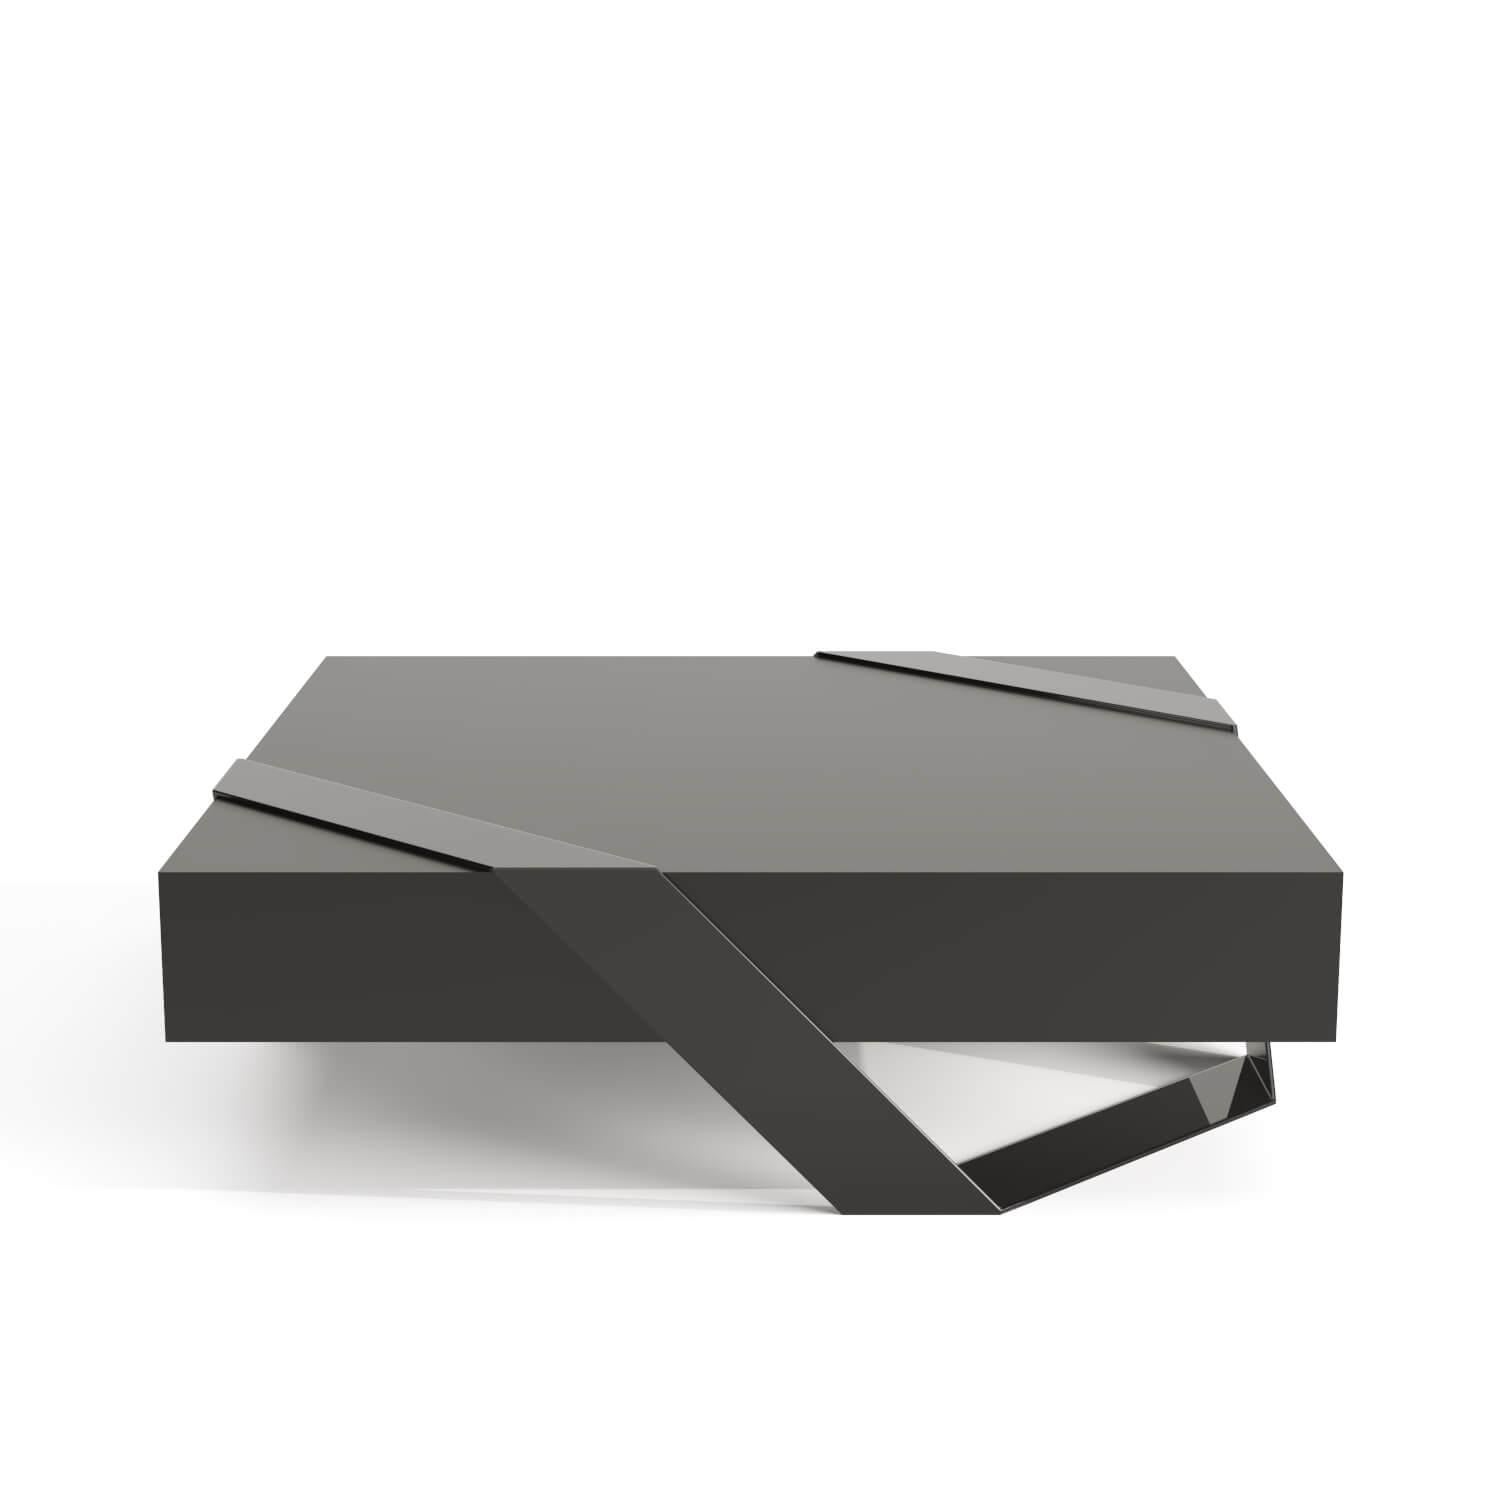 Hand-Crafted Modern Minimalist Square Coffee Table Black Lacquer Brushed Stainless Steel For Sale